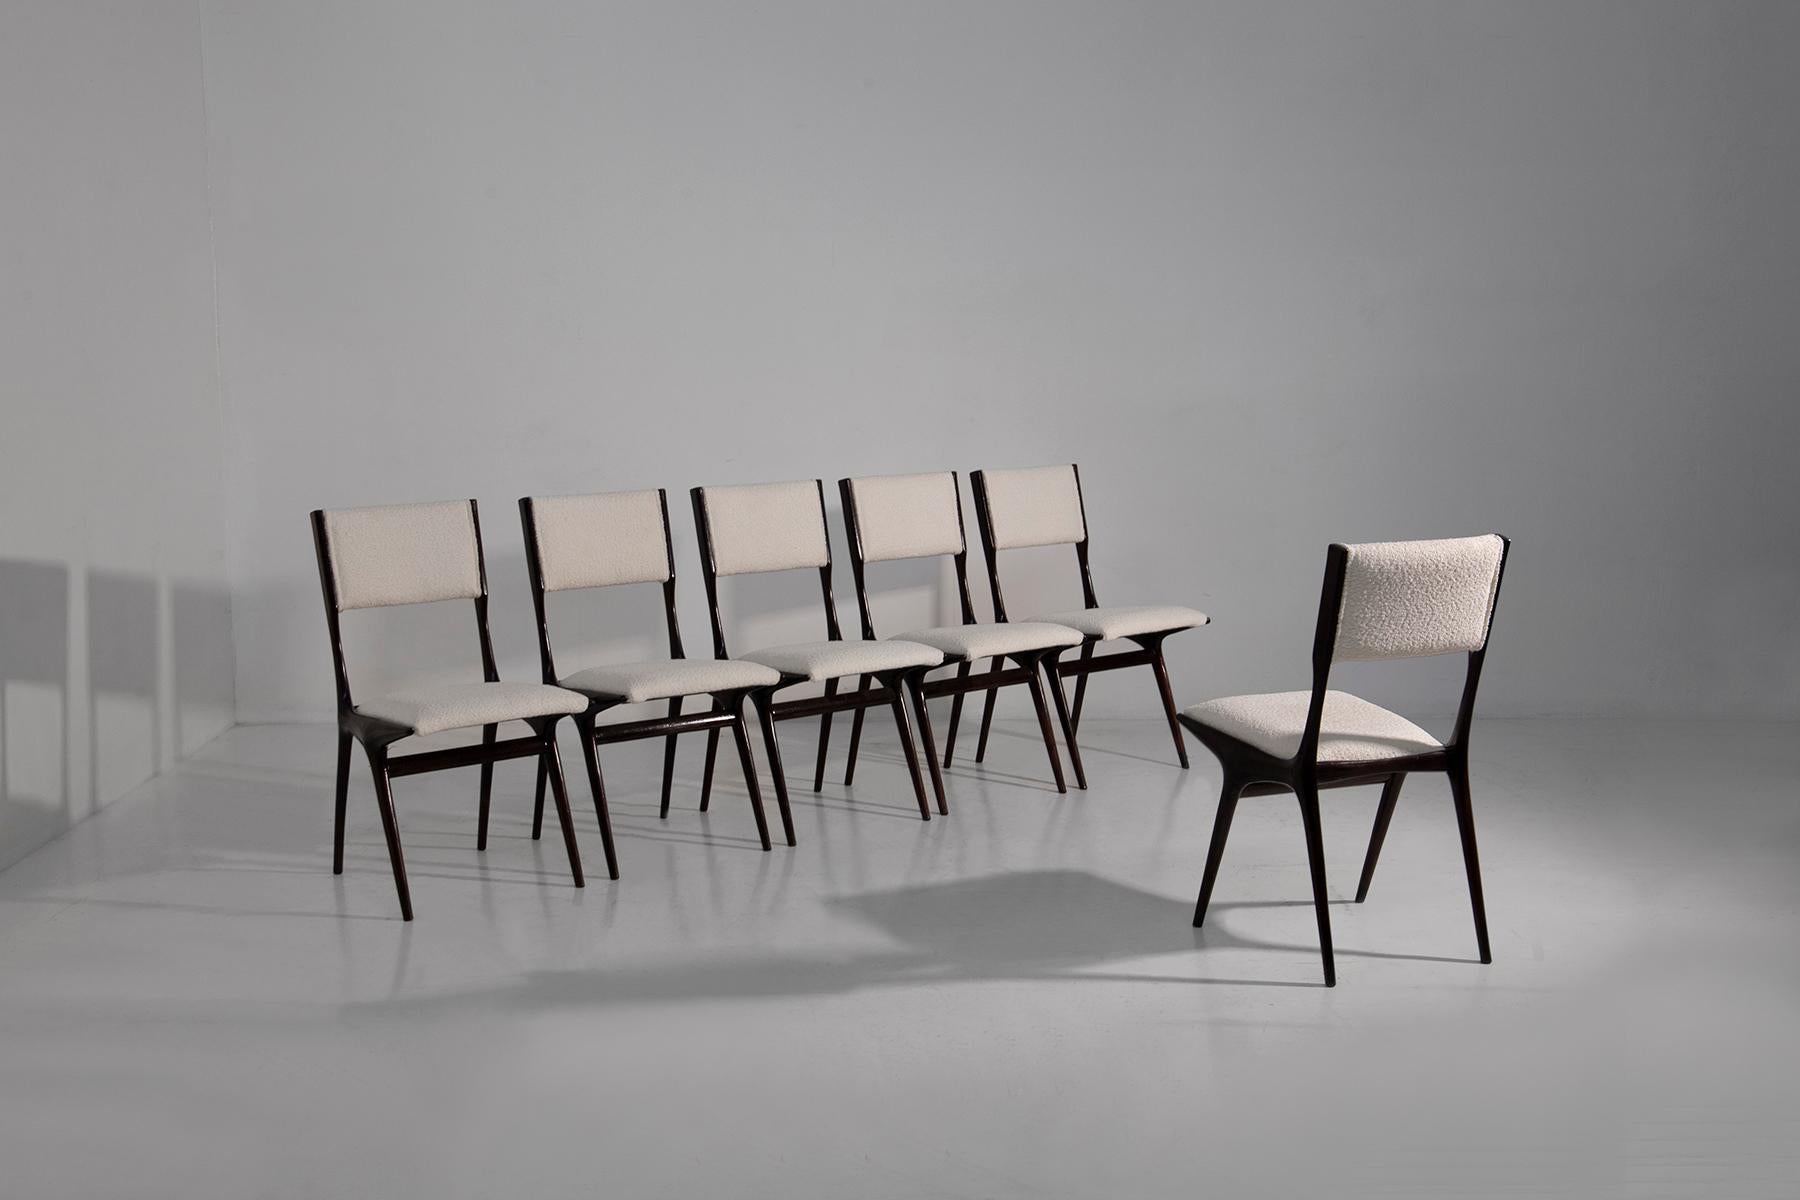 Immerse yourself in the timeless elegance of mid-century Italy with these exquisite Carlo De Carli chairs, each a masterpiece of design and craftsmanship straight from the 1950s. Imagine yourself sitting on the warmth of history: these chairs boast